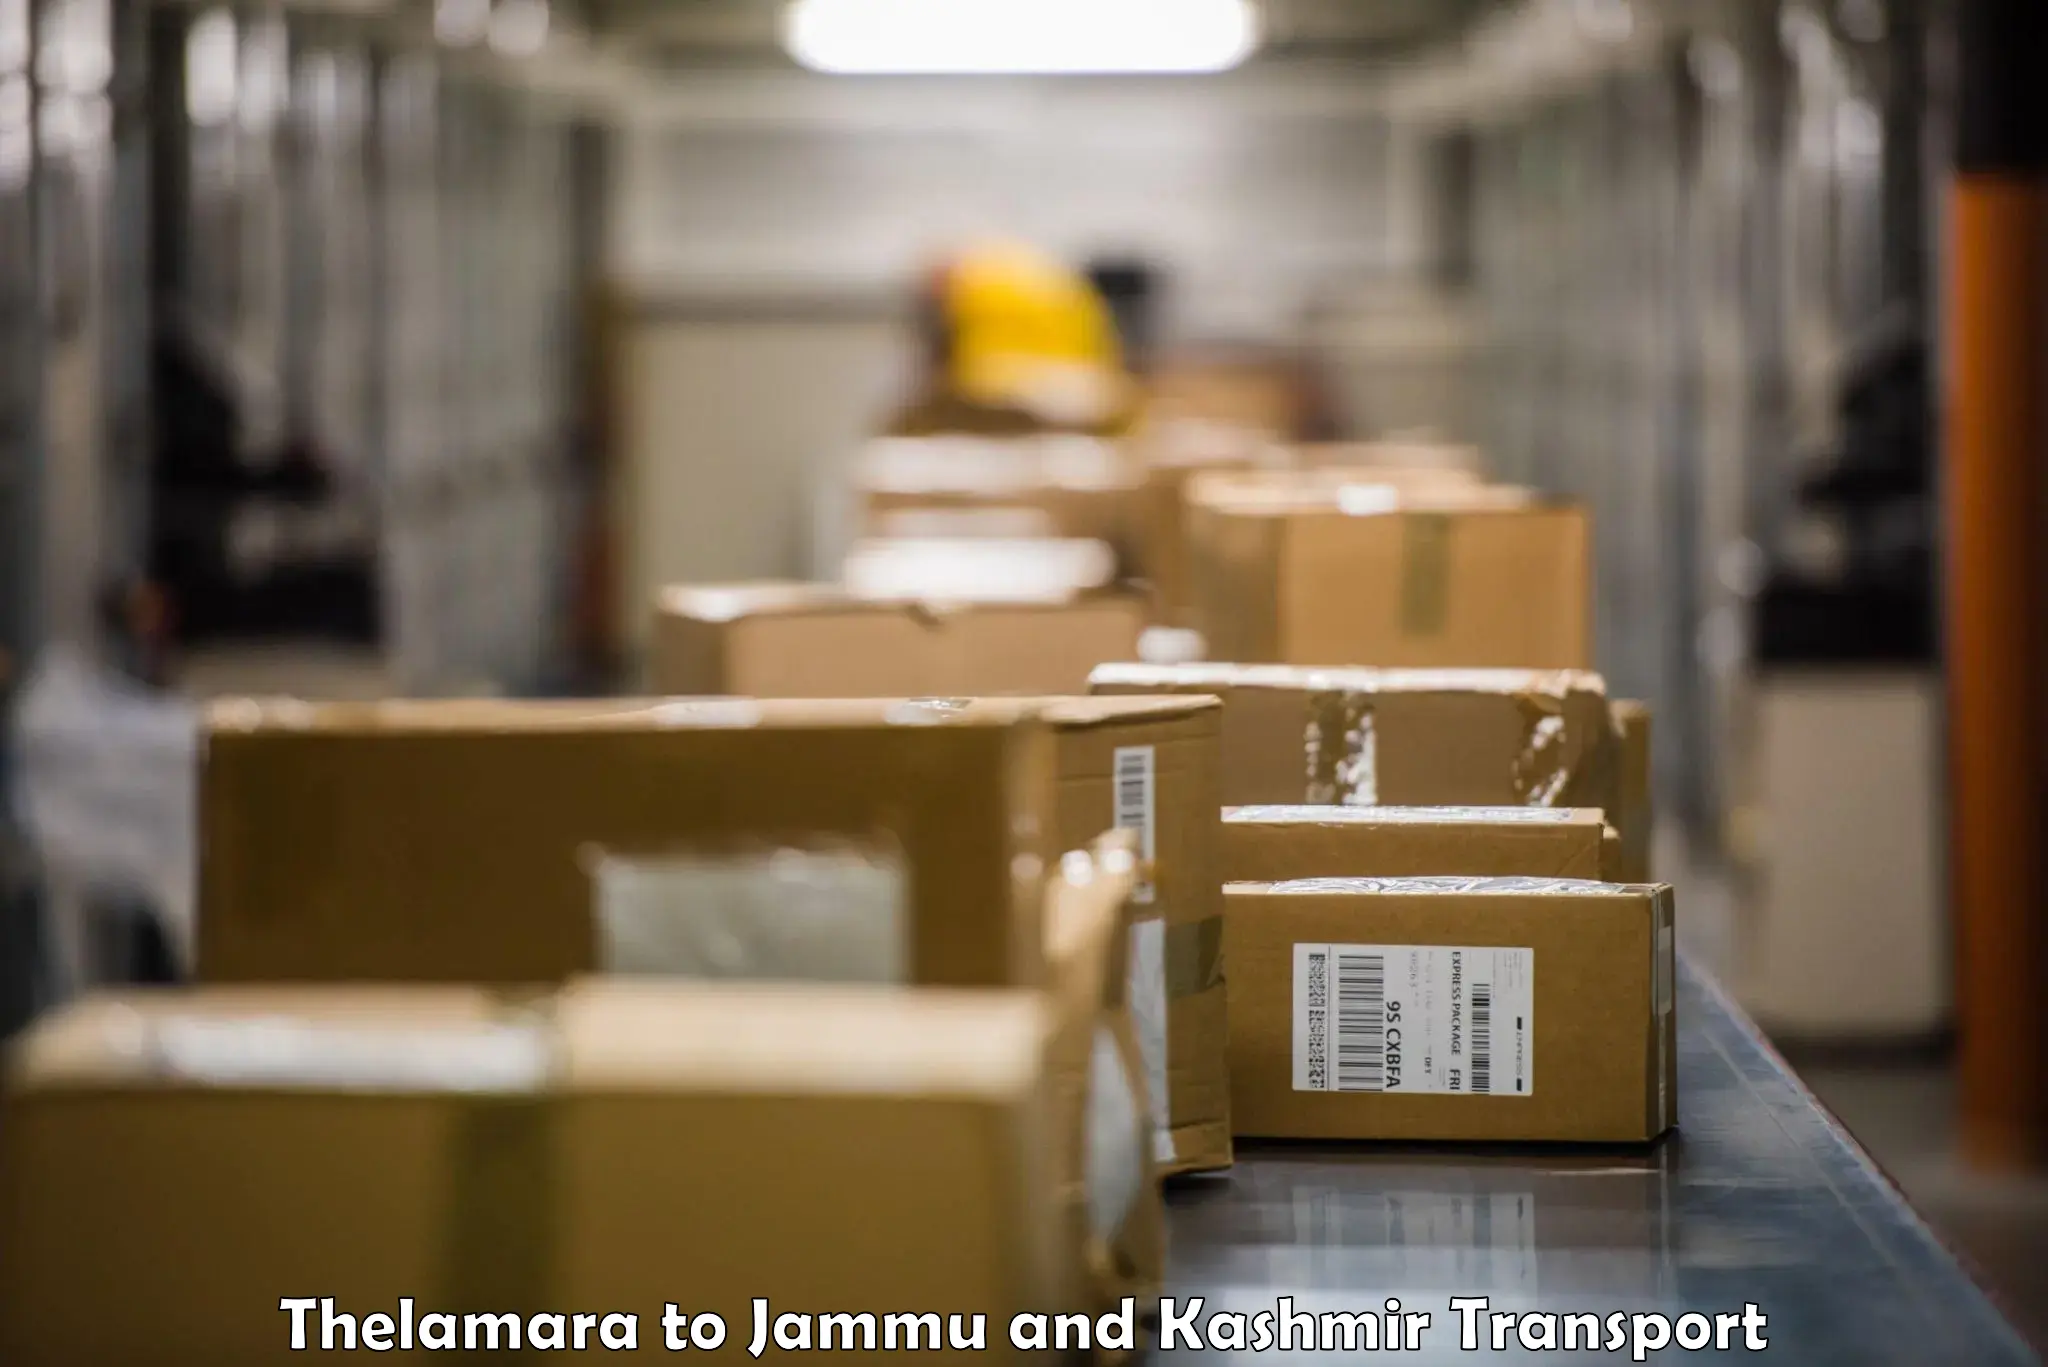 Commercial transport service Thelamara to Jammu and Kashmir